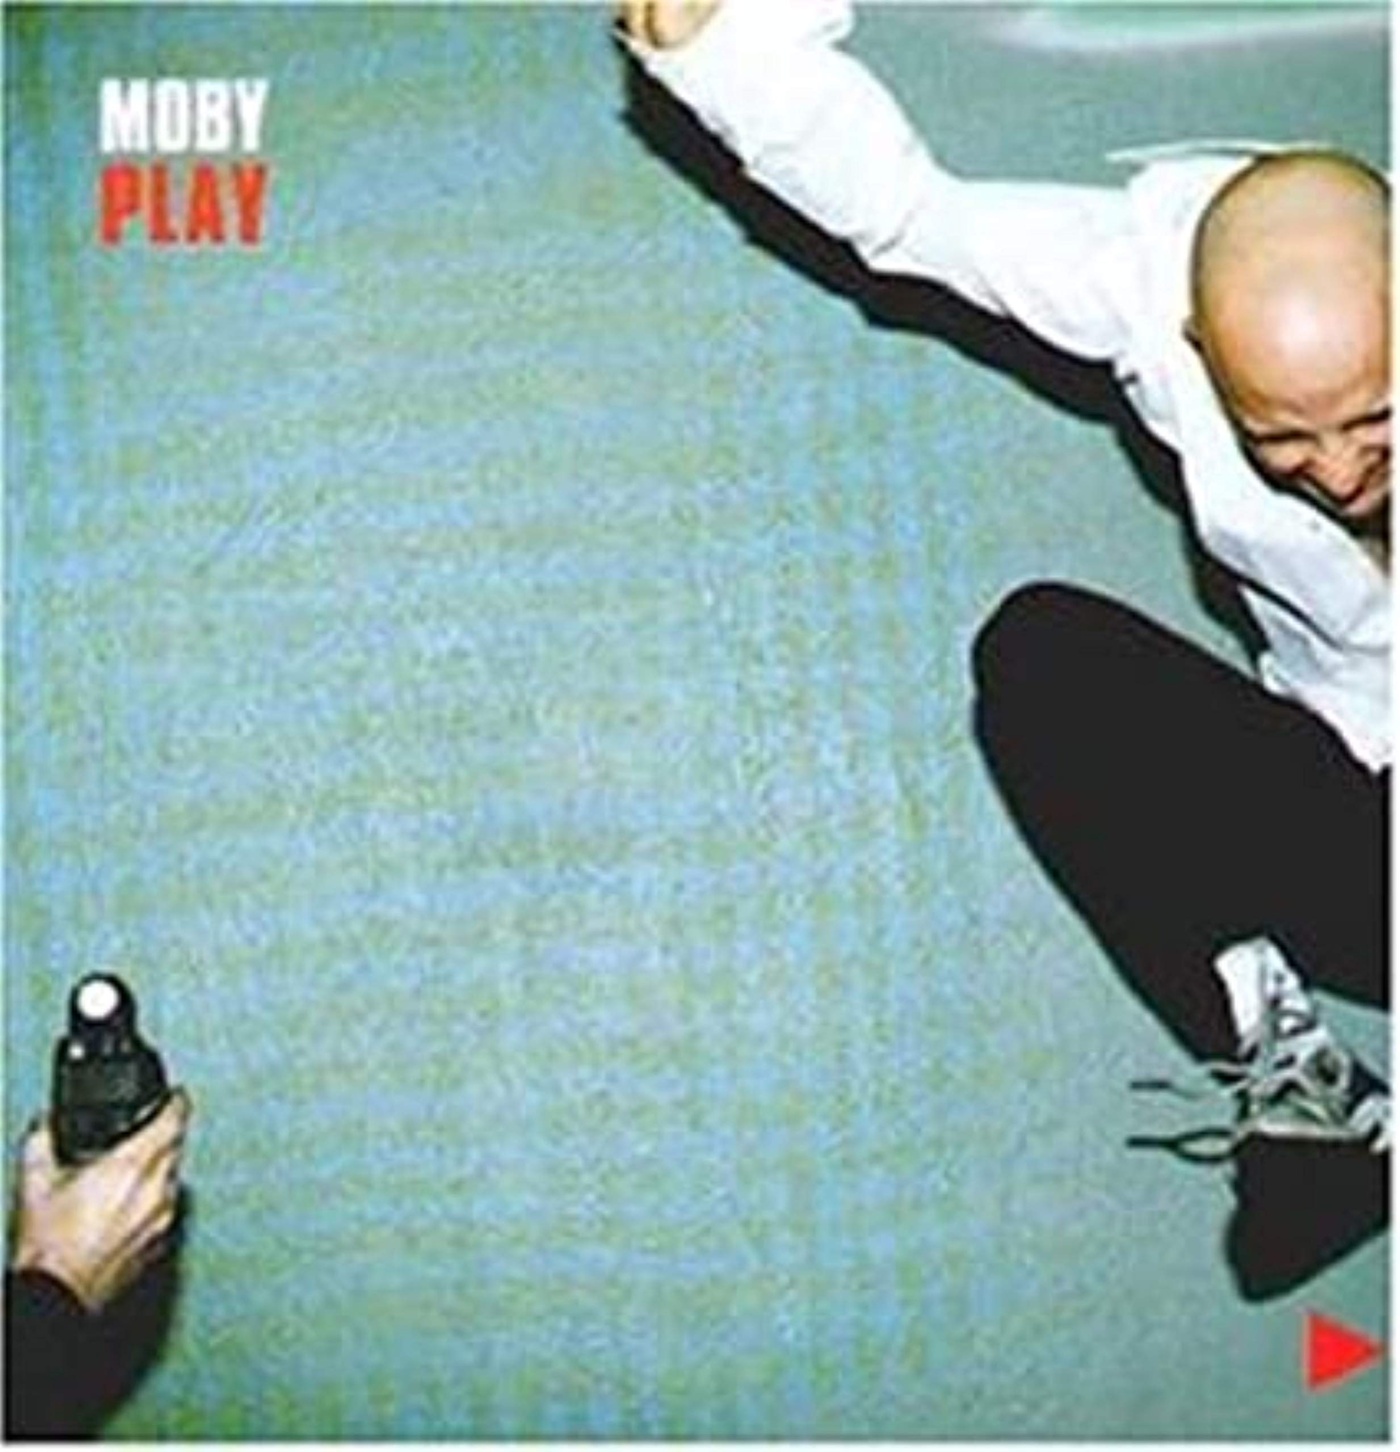 Moby play. Moby Play 1999. Виниловые пластинки Moby Play. Moby 2002. Moby Play альбом.